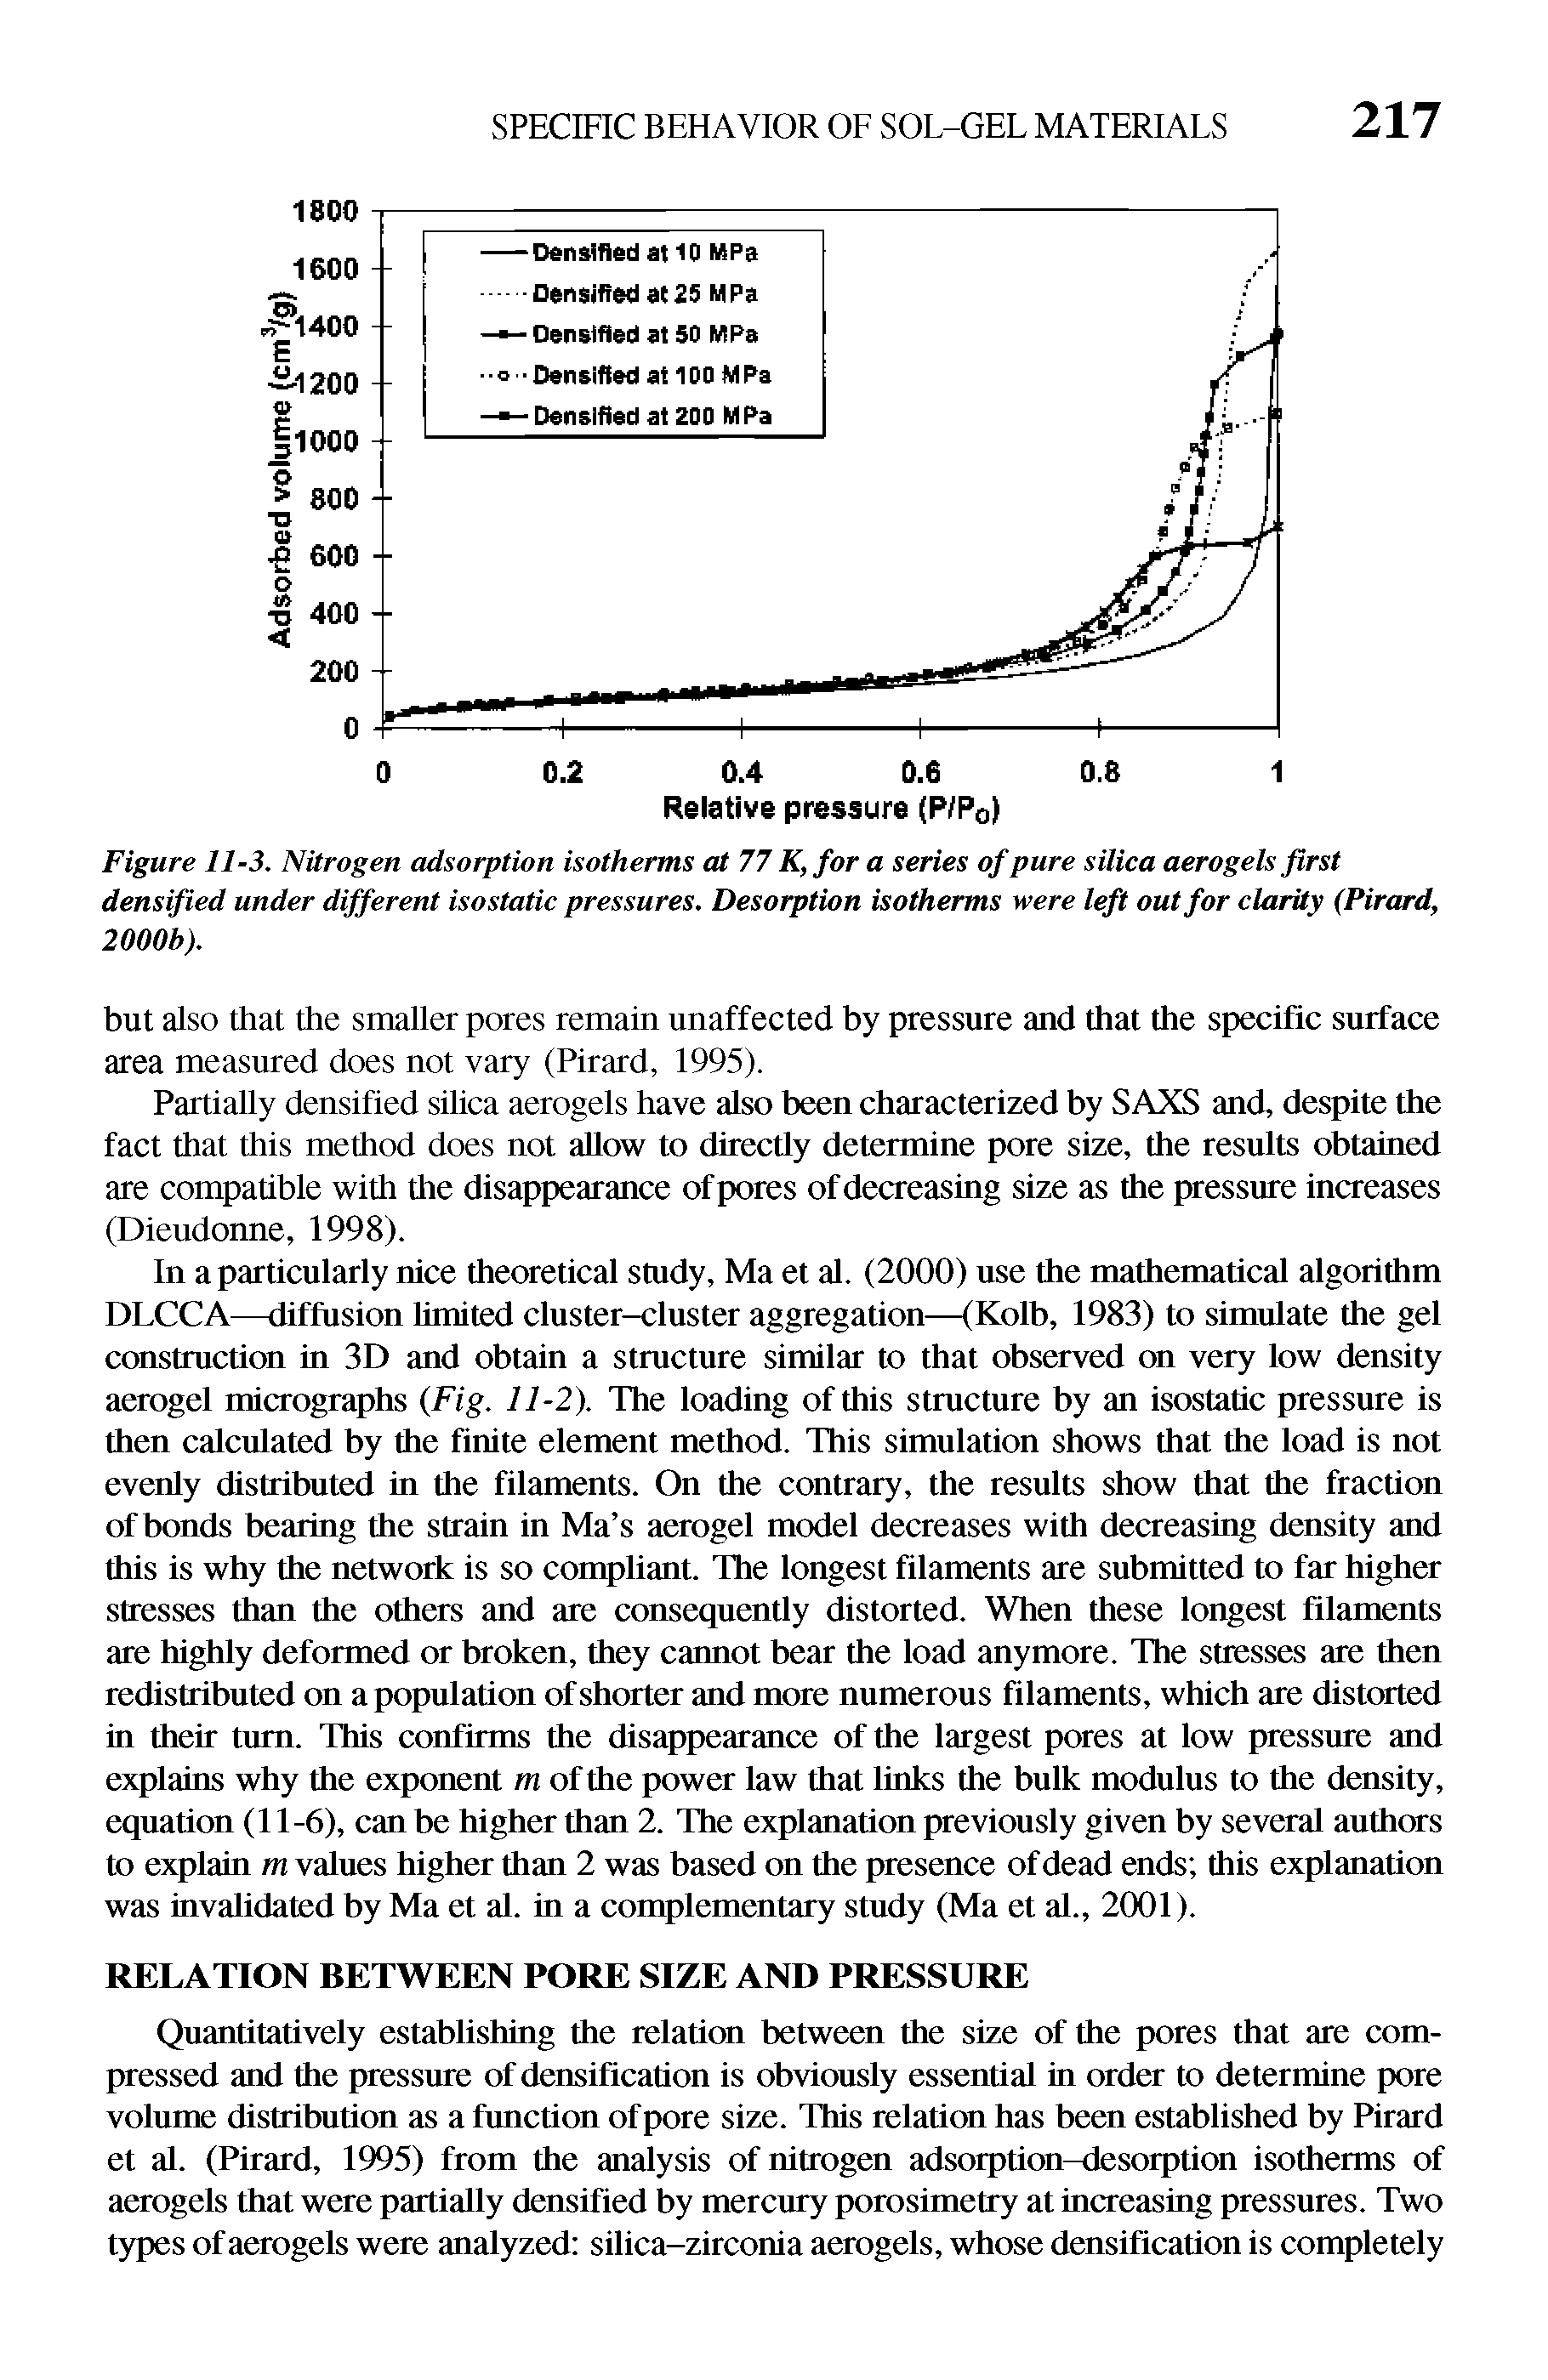 Figure 11-3. Nitrogen adsorption isotherms at 77 K, for a series of pure silica aerogels first densified under different isostatic pressures. Desorption isotherms were left out for clarity (Pirard, 2000b).